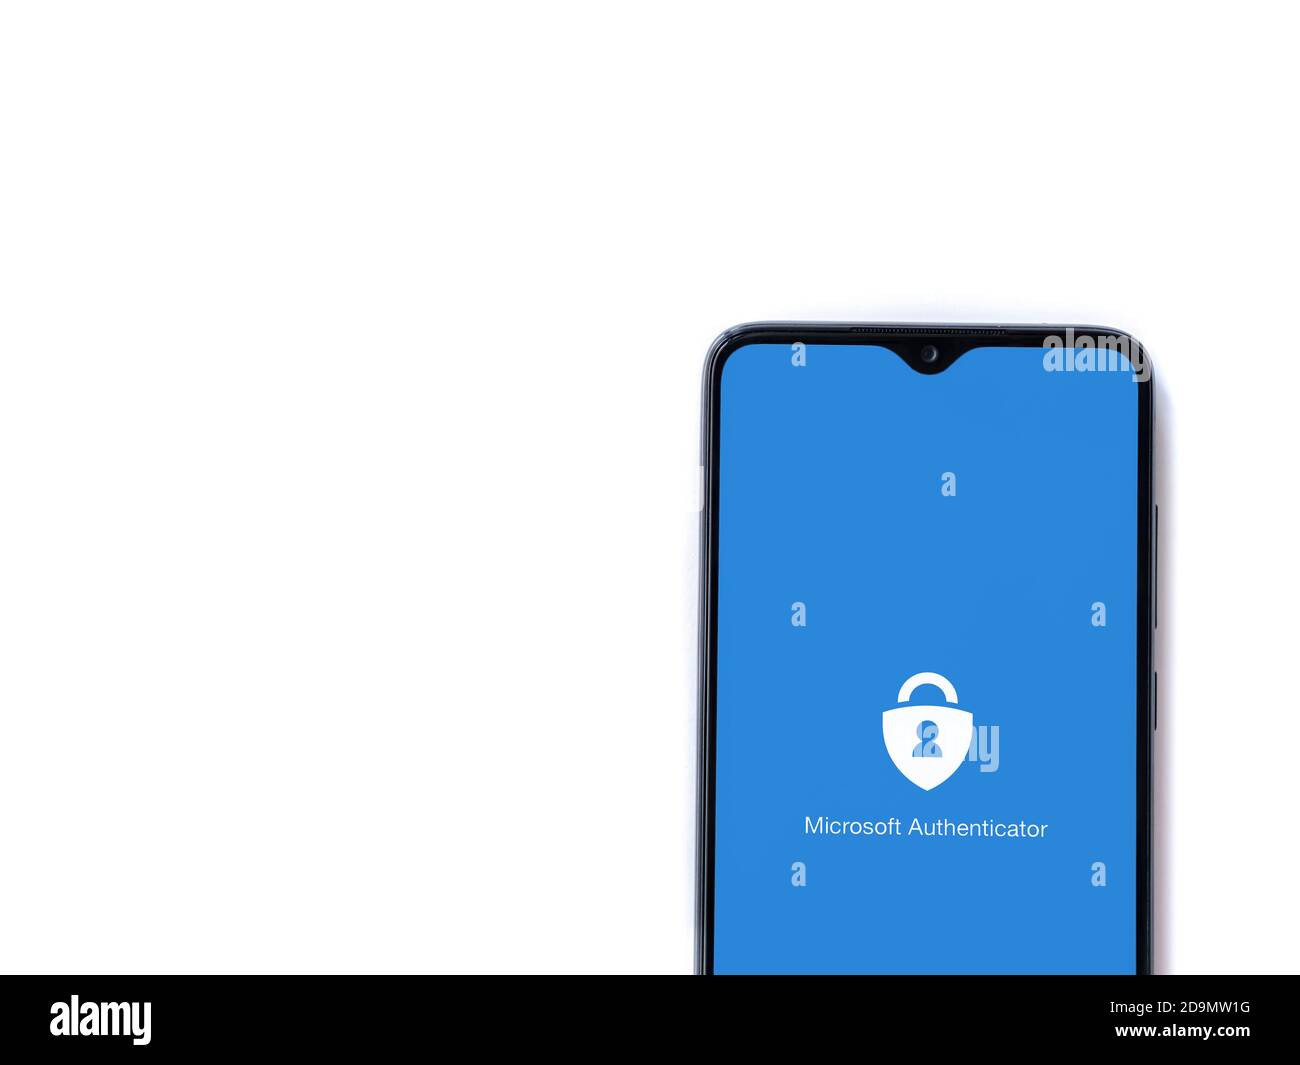 Lod, Israel - July 8, 2020: Microsoft Authenticator app launch screen with logo on the display of a black mobile smartphone isolated on white backgrou Stock Photo